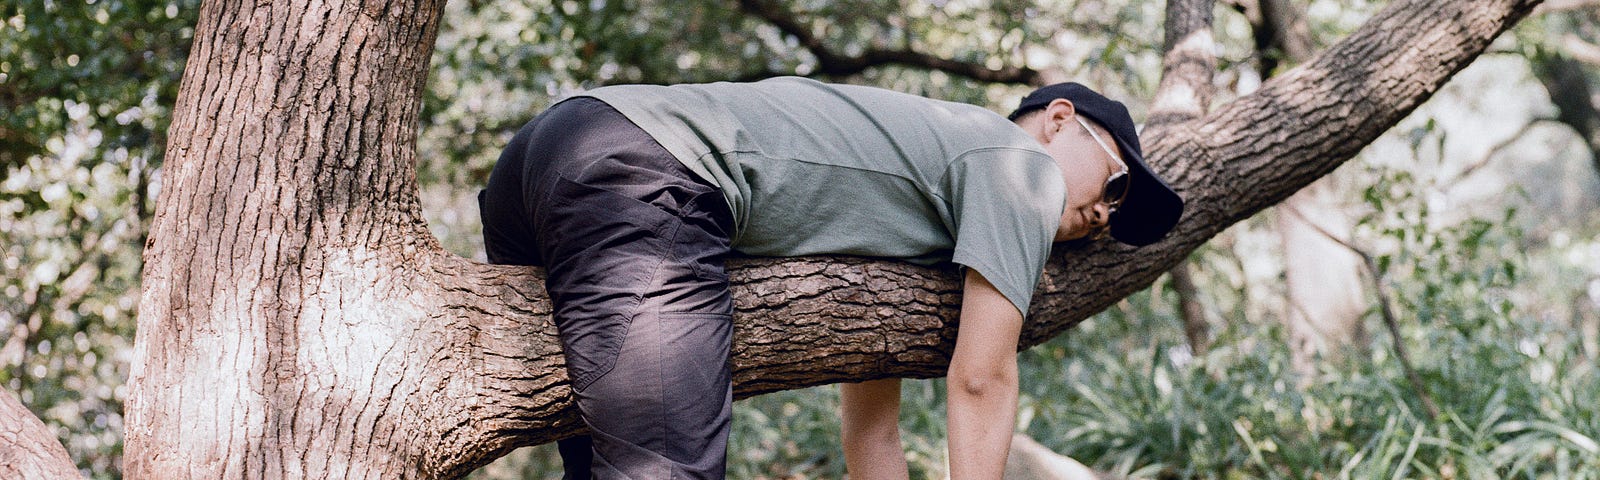 A man is lying on a tree branch, tired from his hike.